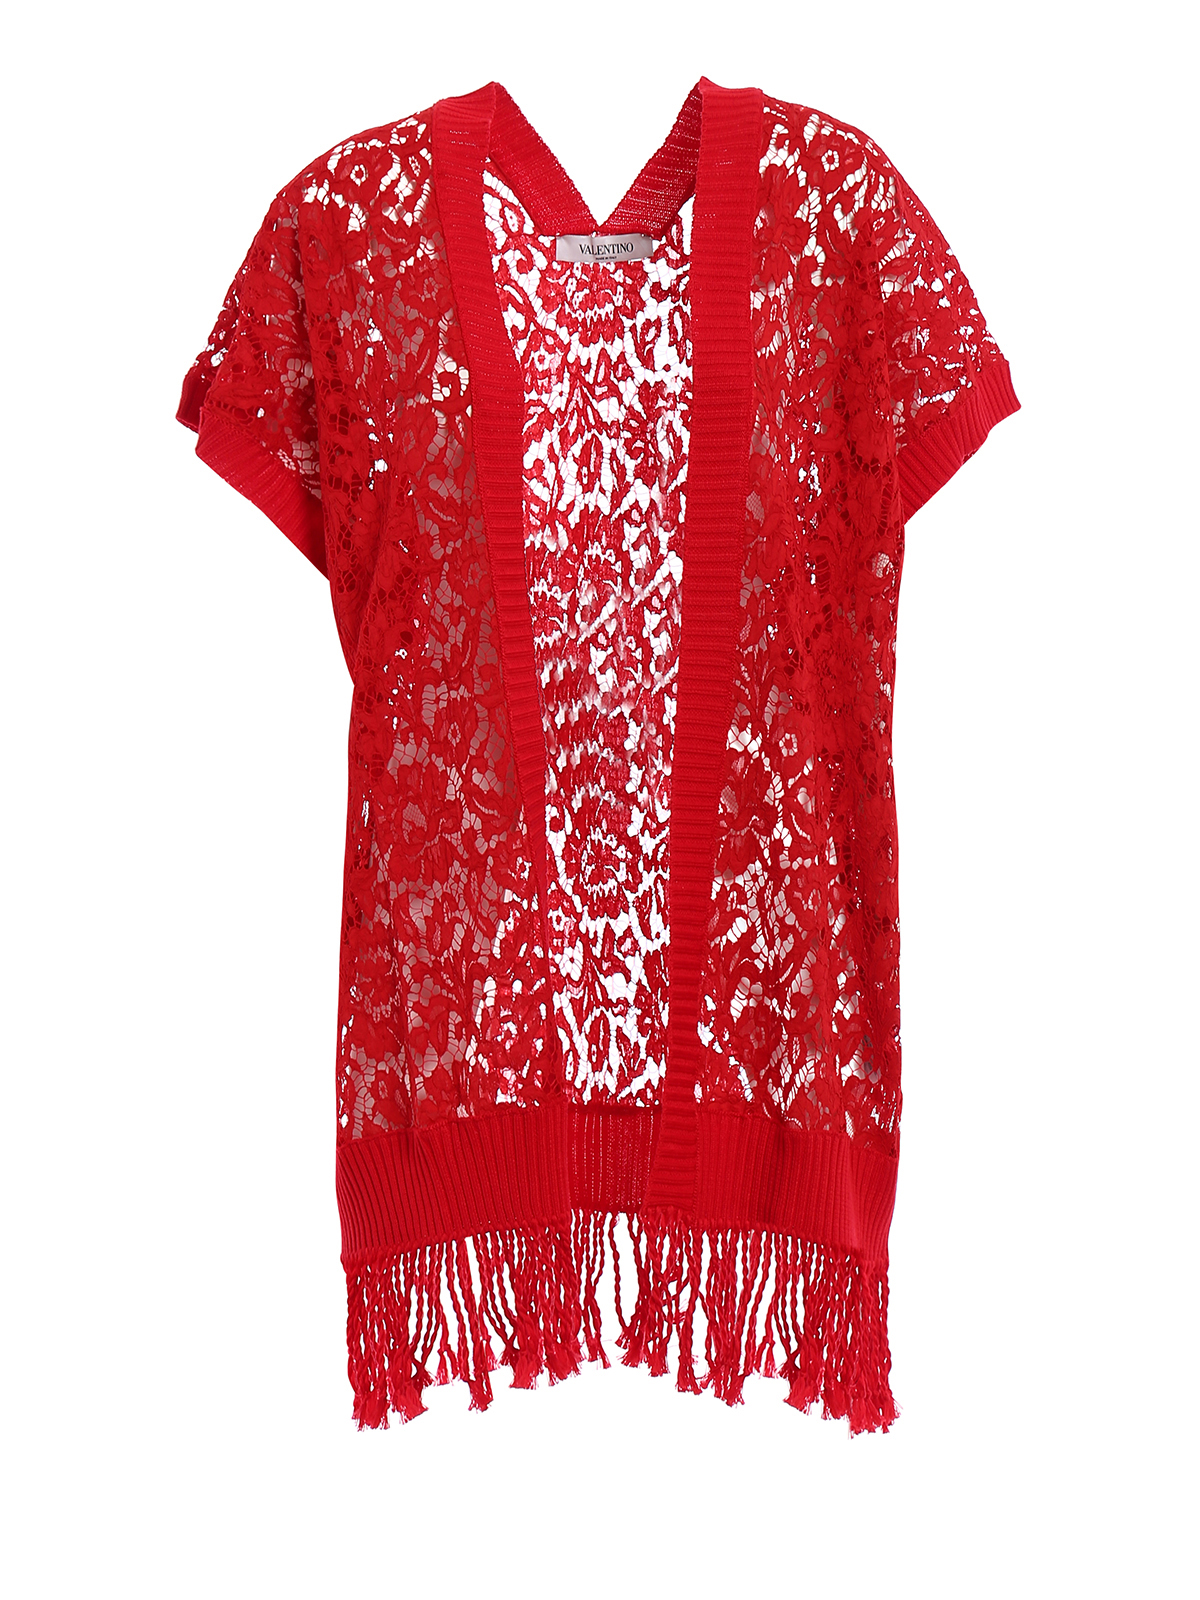 Cardigans Valentino - Heavy Lace open front red poncho -